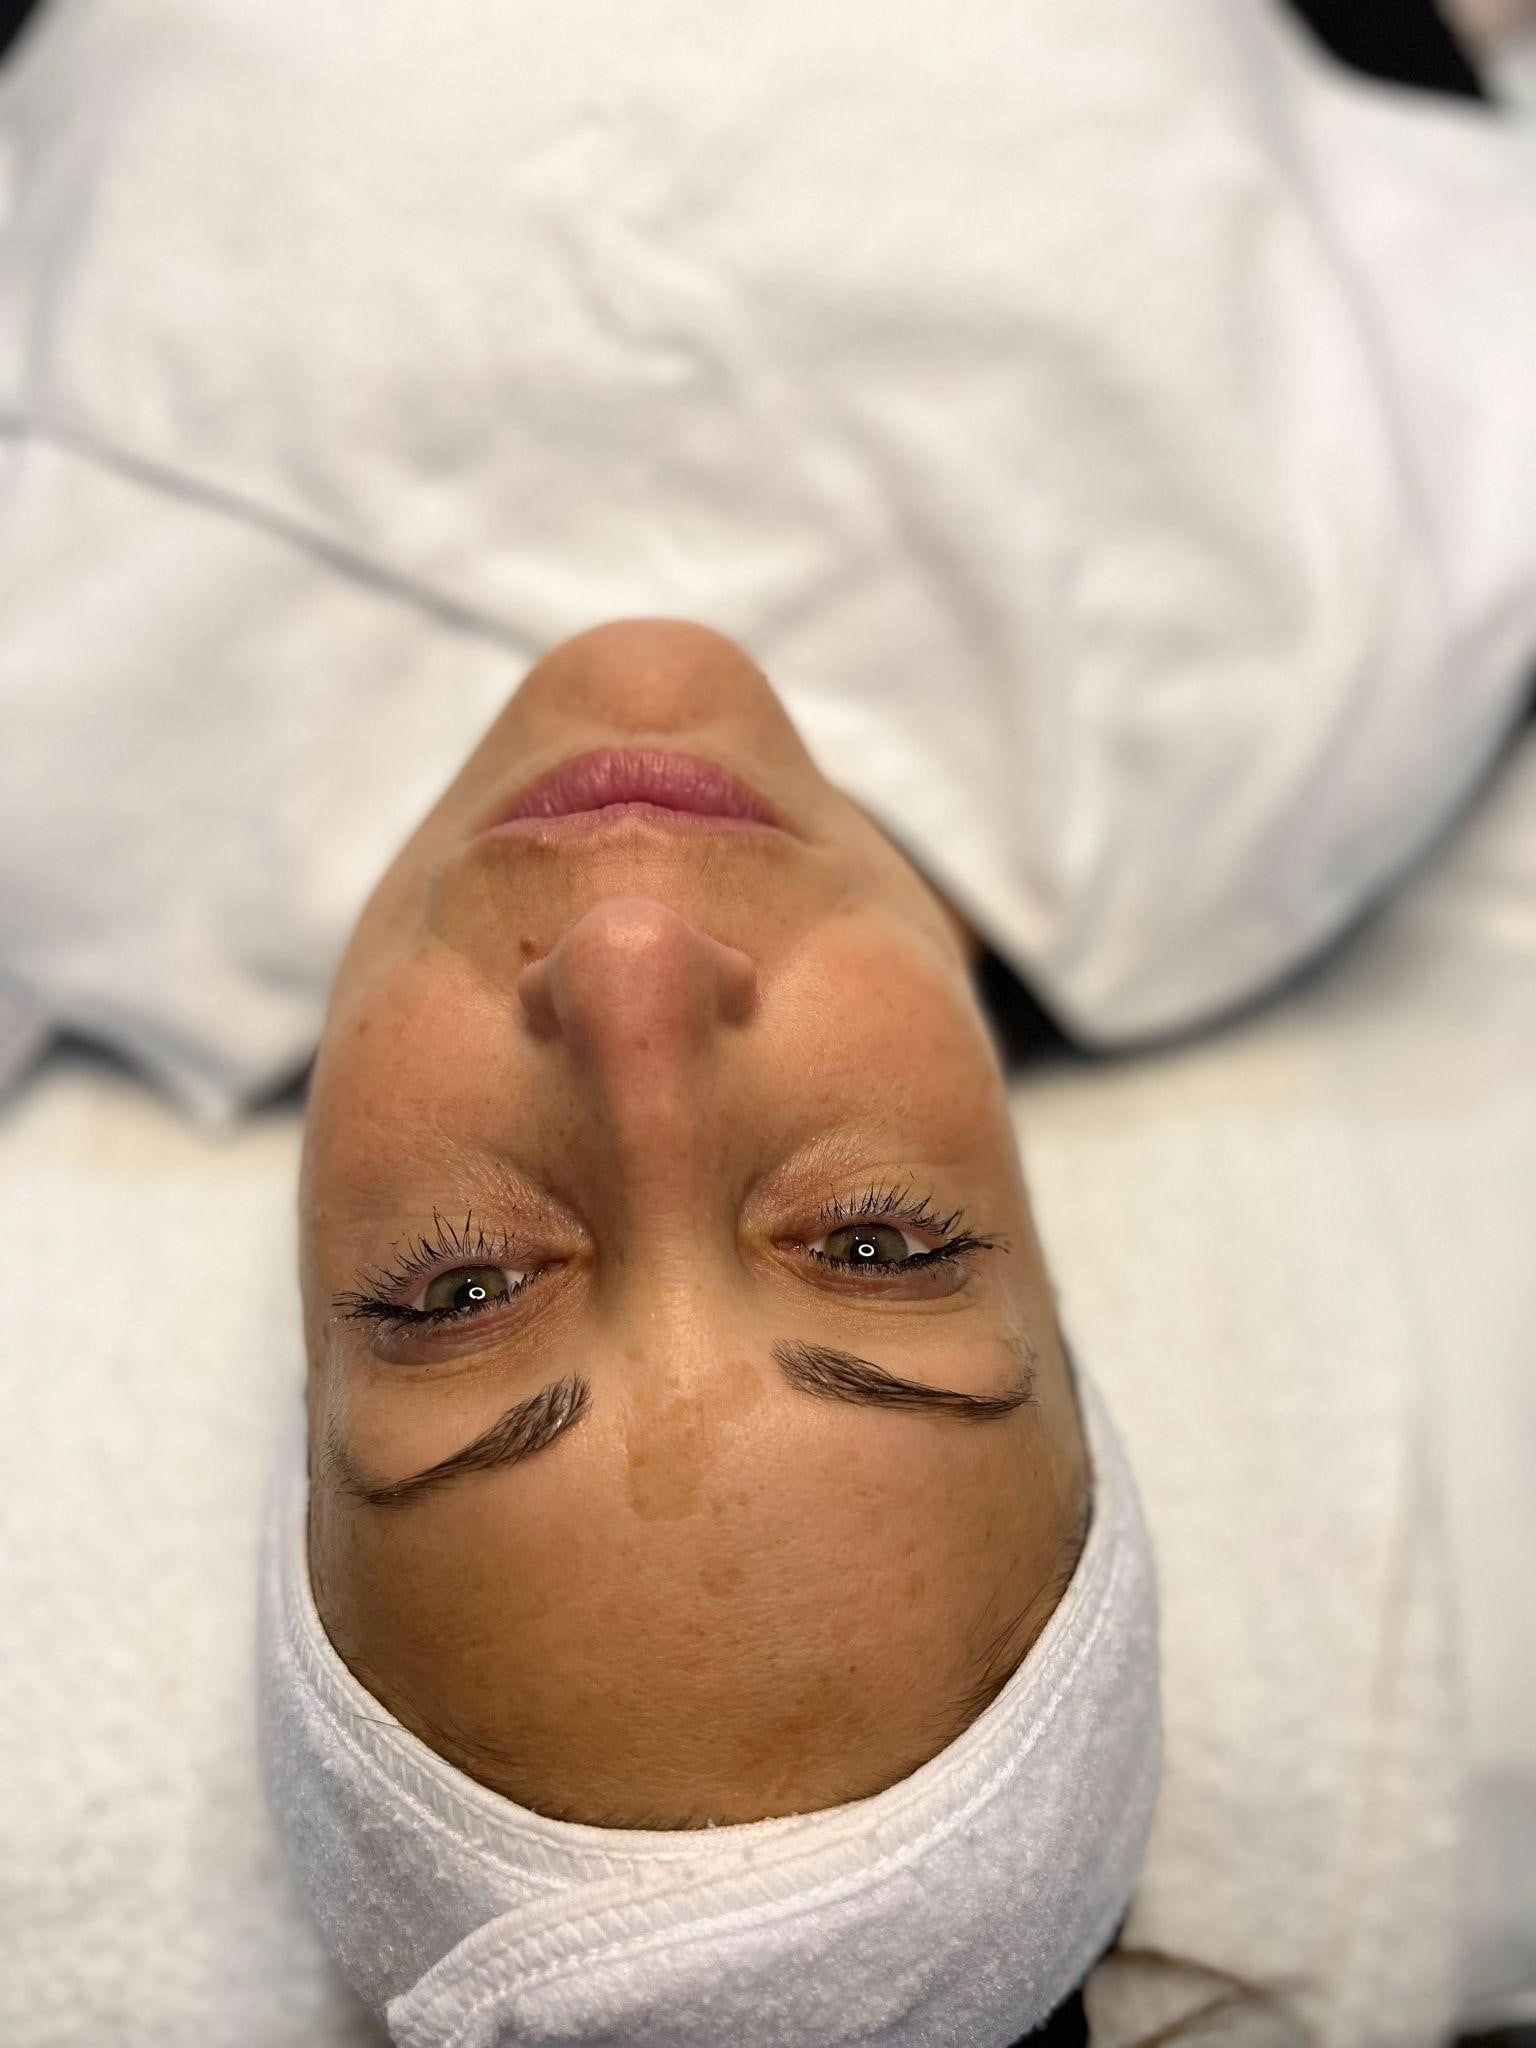 A Women's face before Chemical peels | Cultivated Beauty Aesthetic in Guntersville, AL